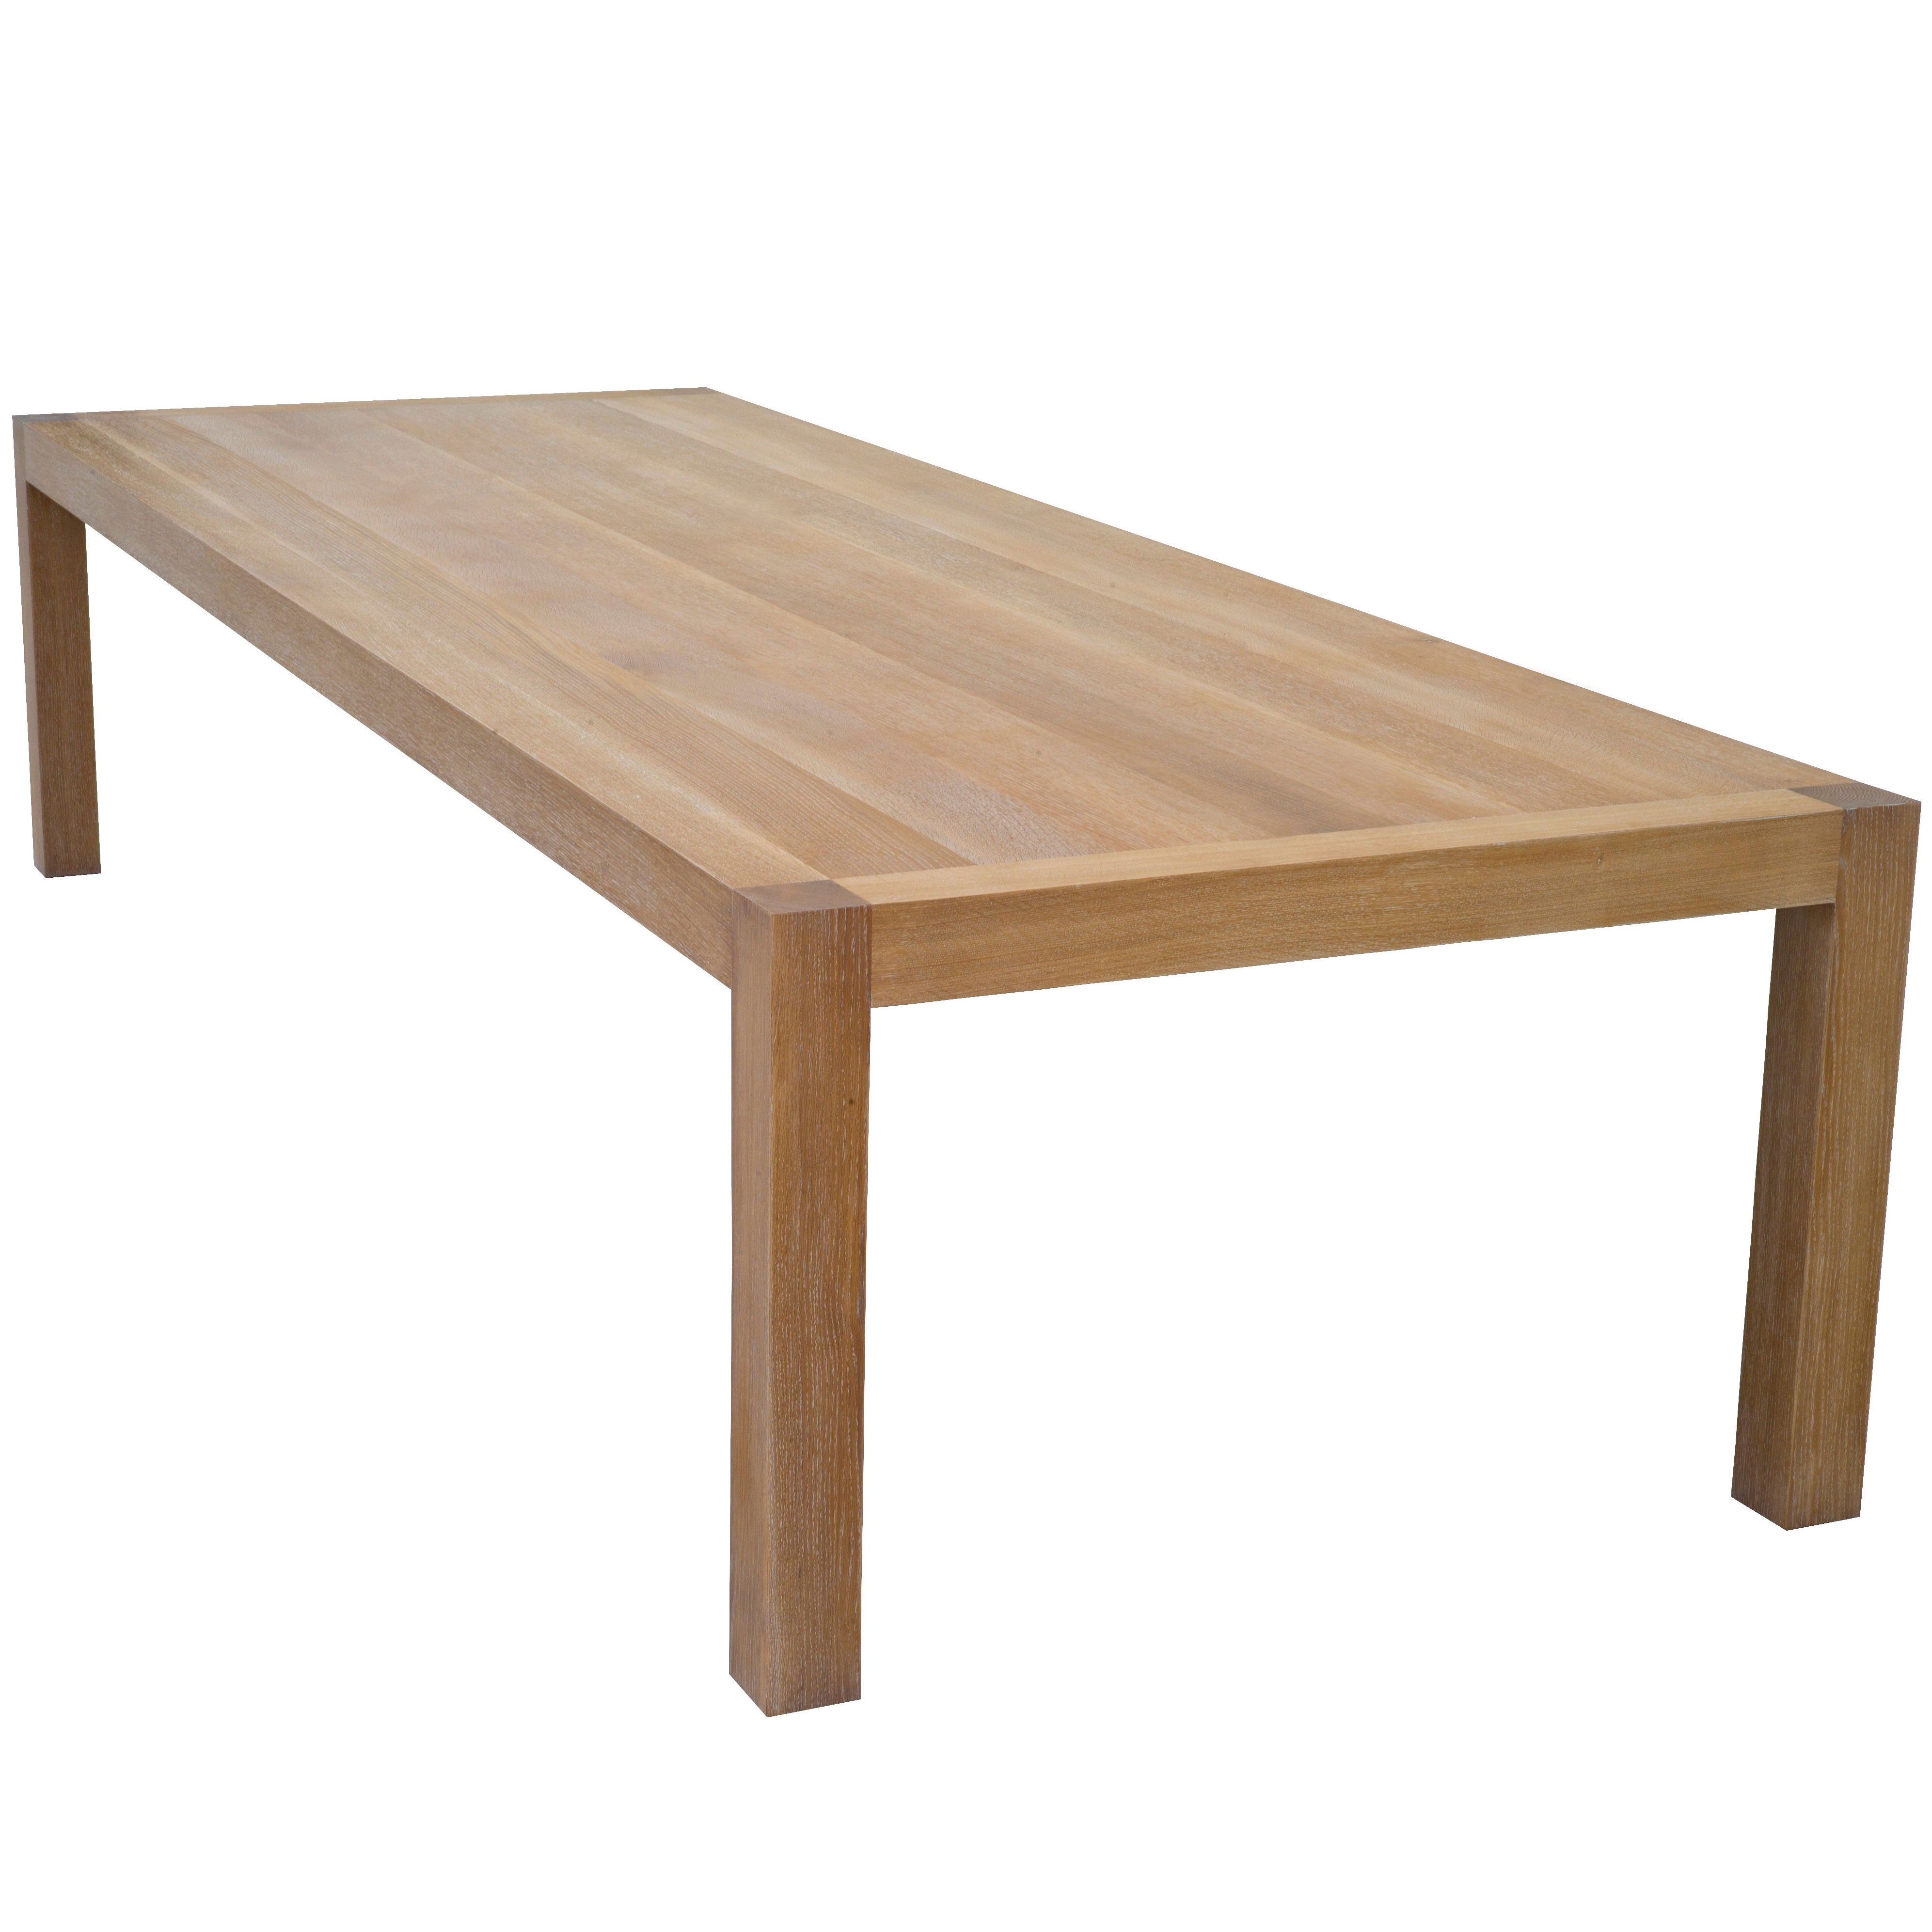 Parsons Table with Classic Limed Oak Finish, Built to Order